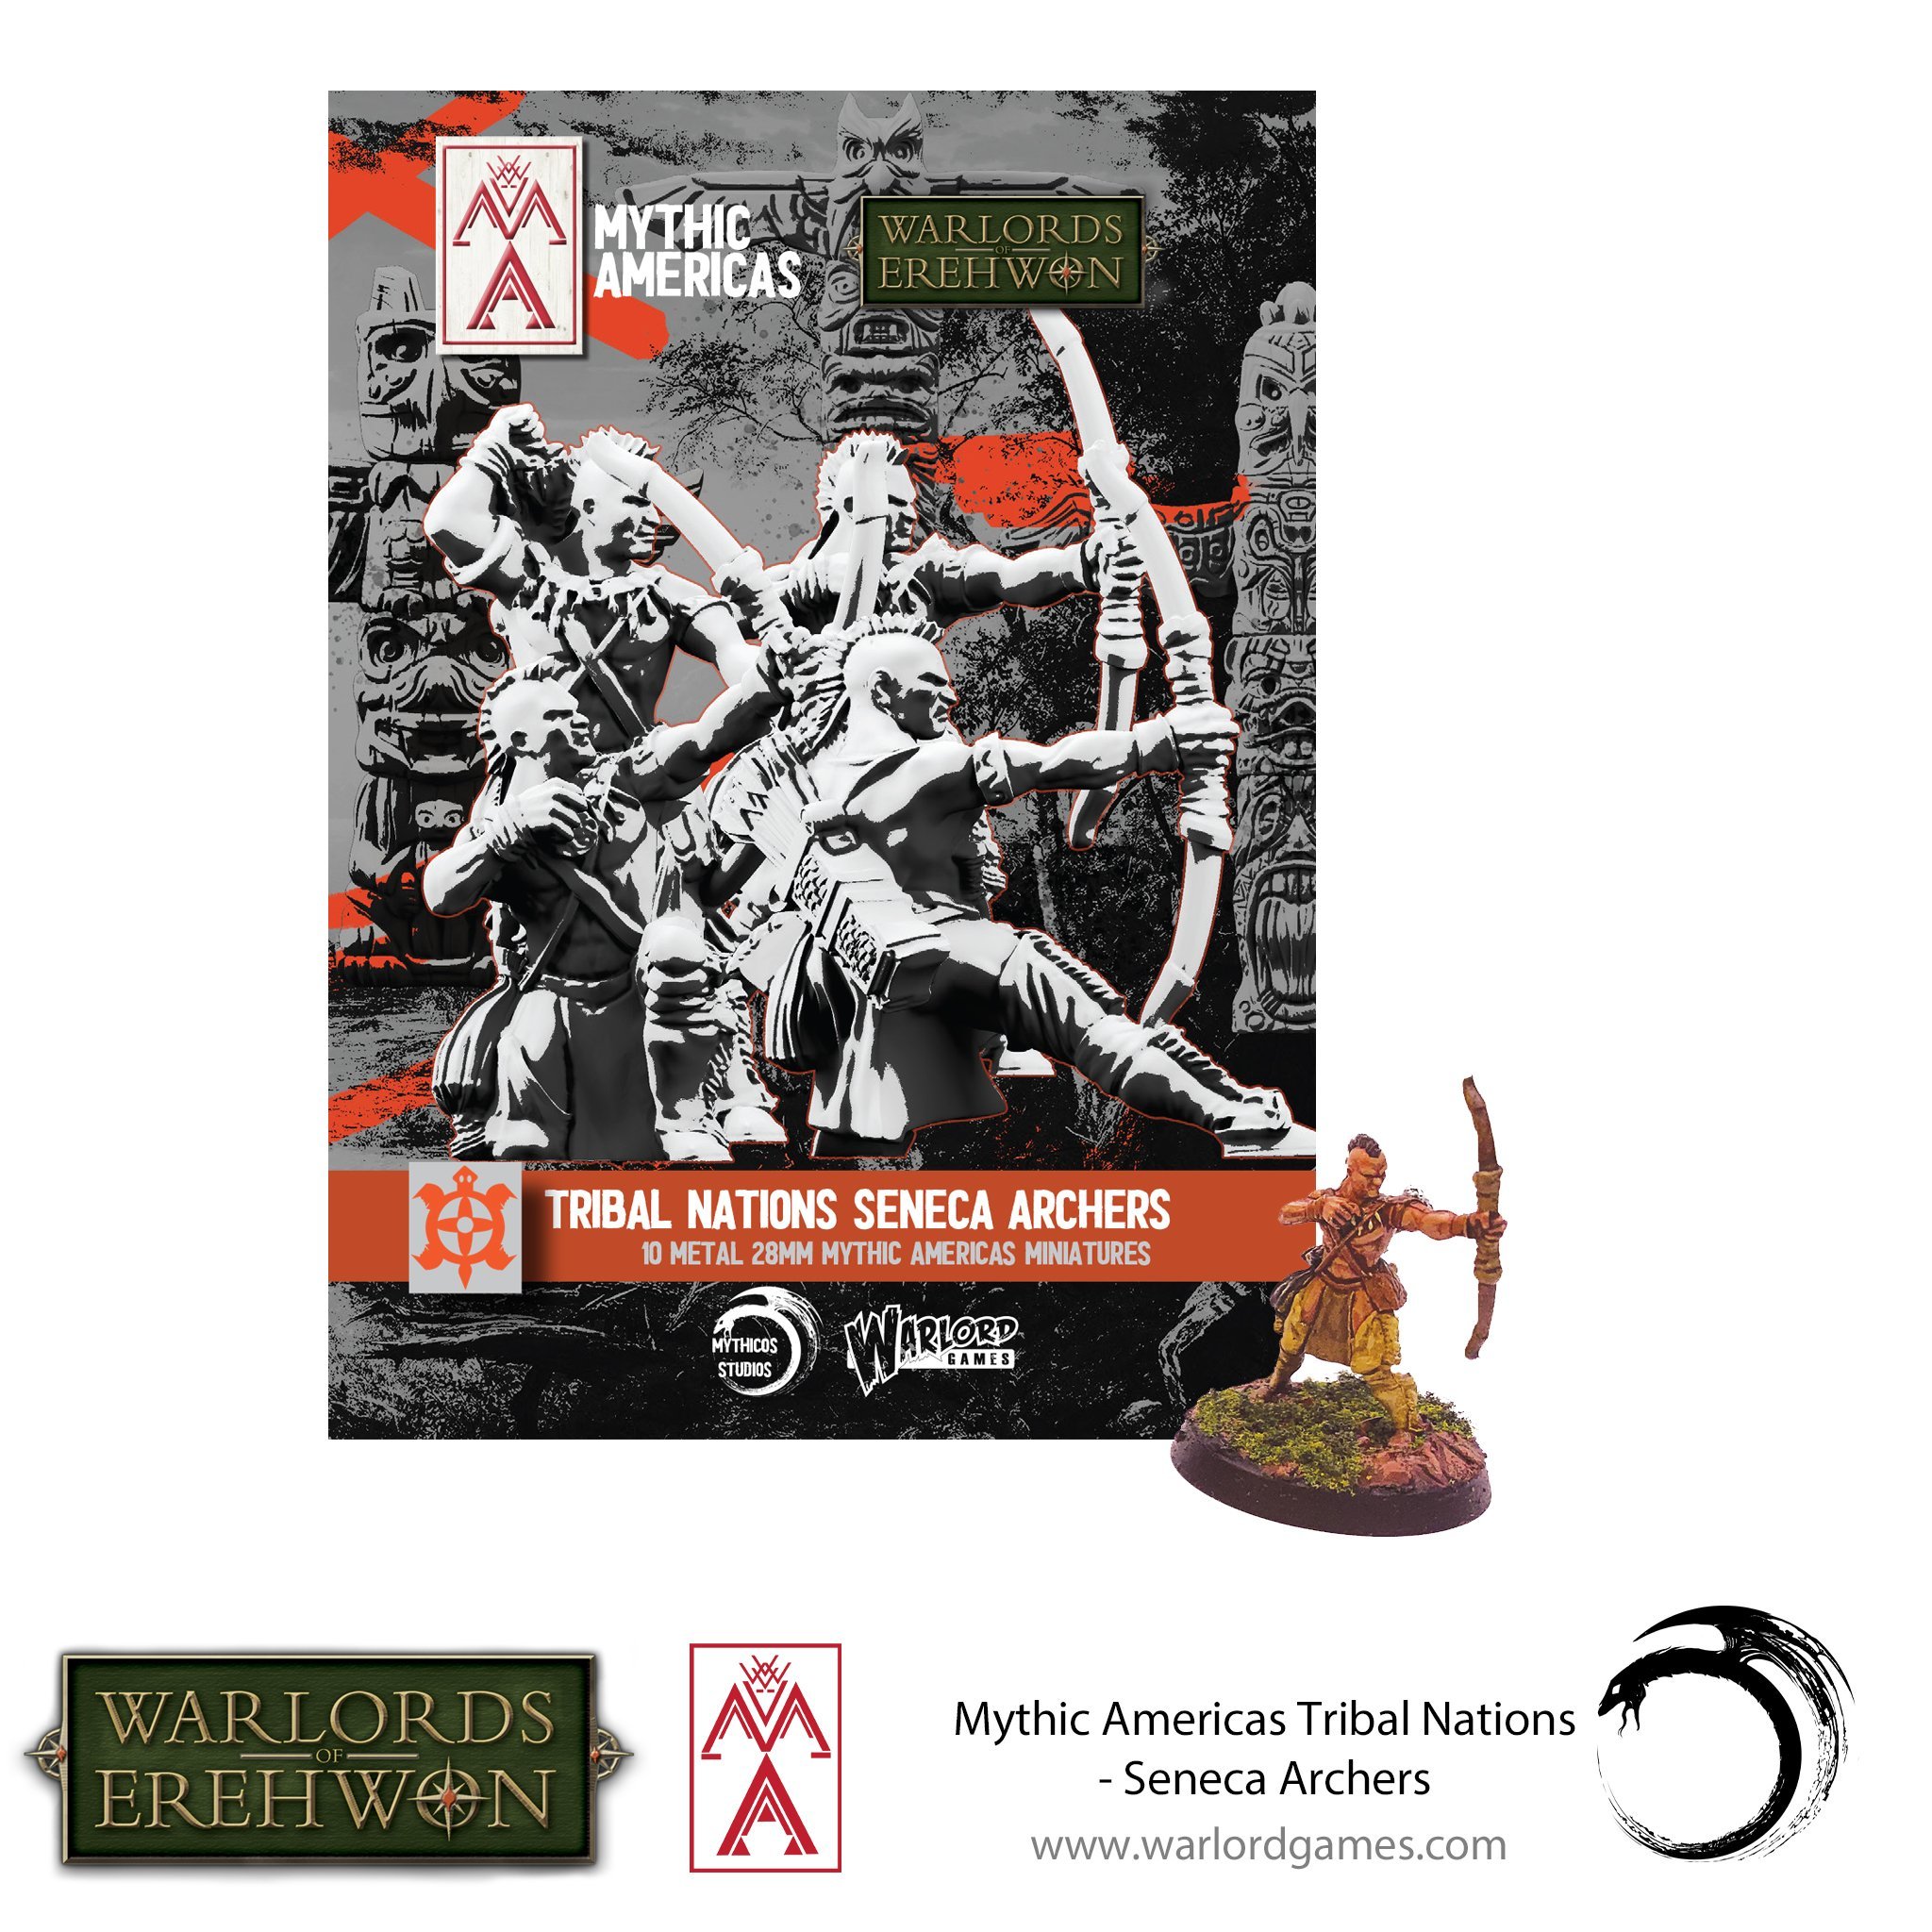 Mythic metals. Warlords of Erehwon. Mythic Americas.